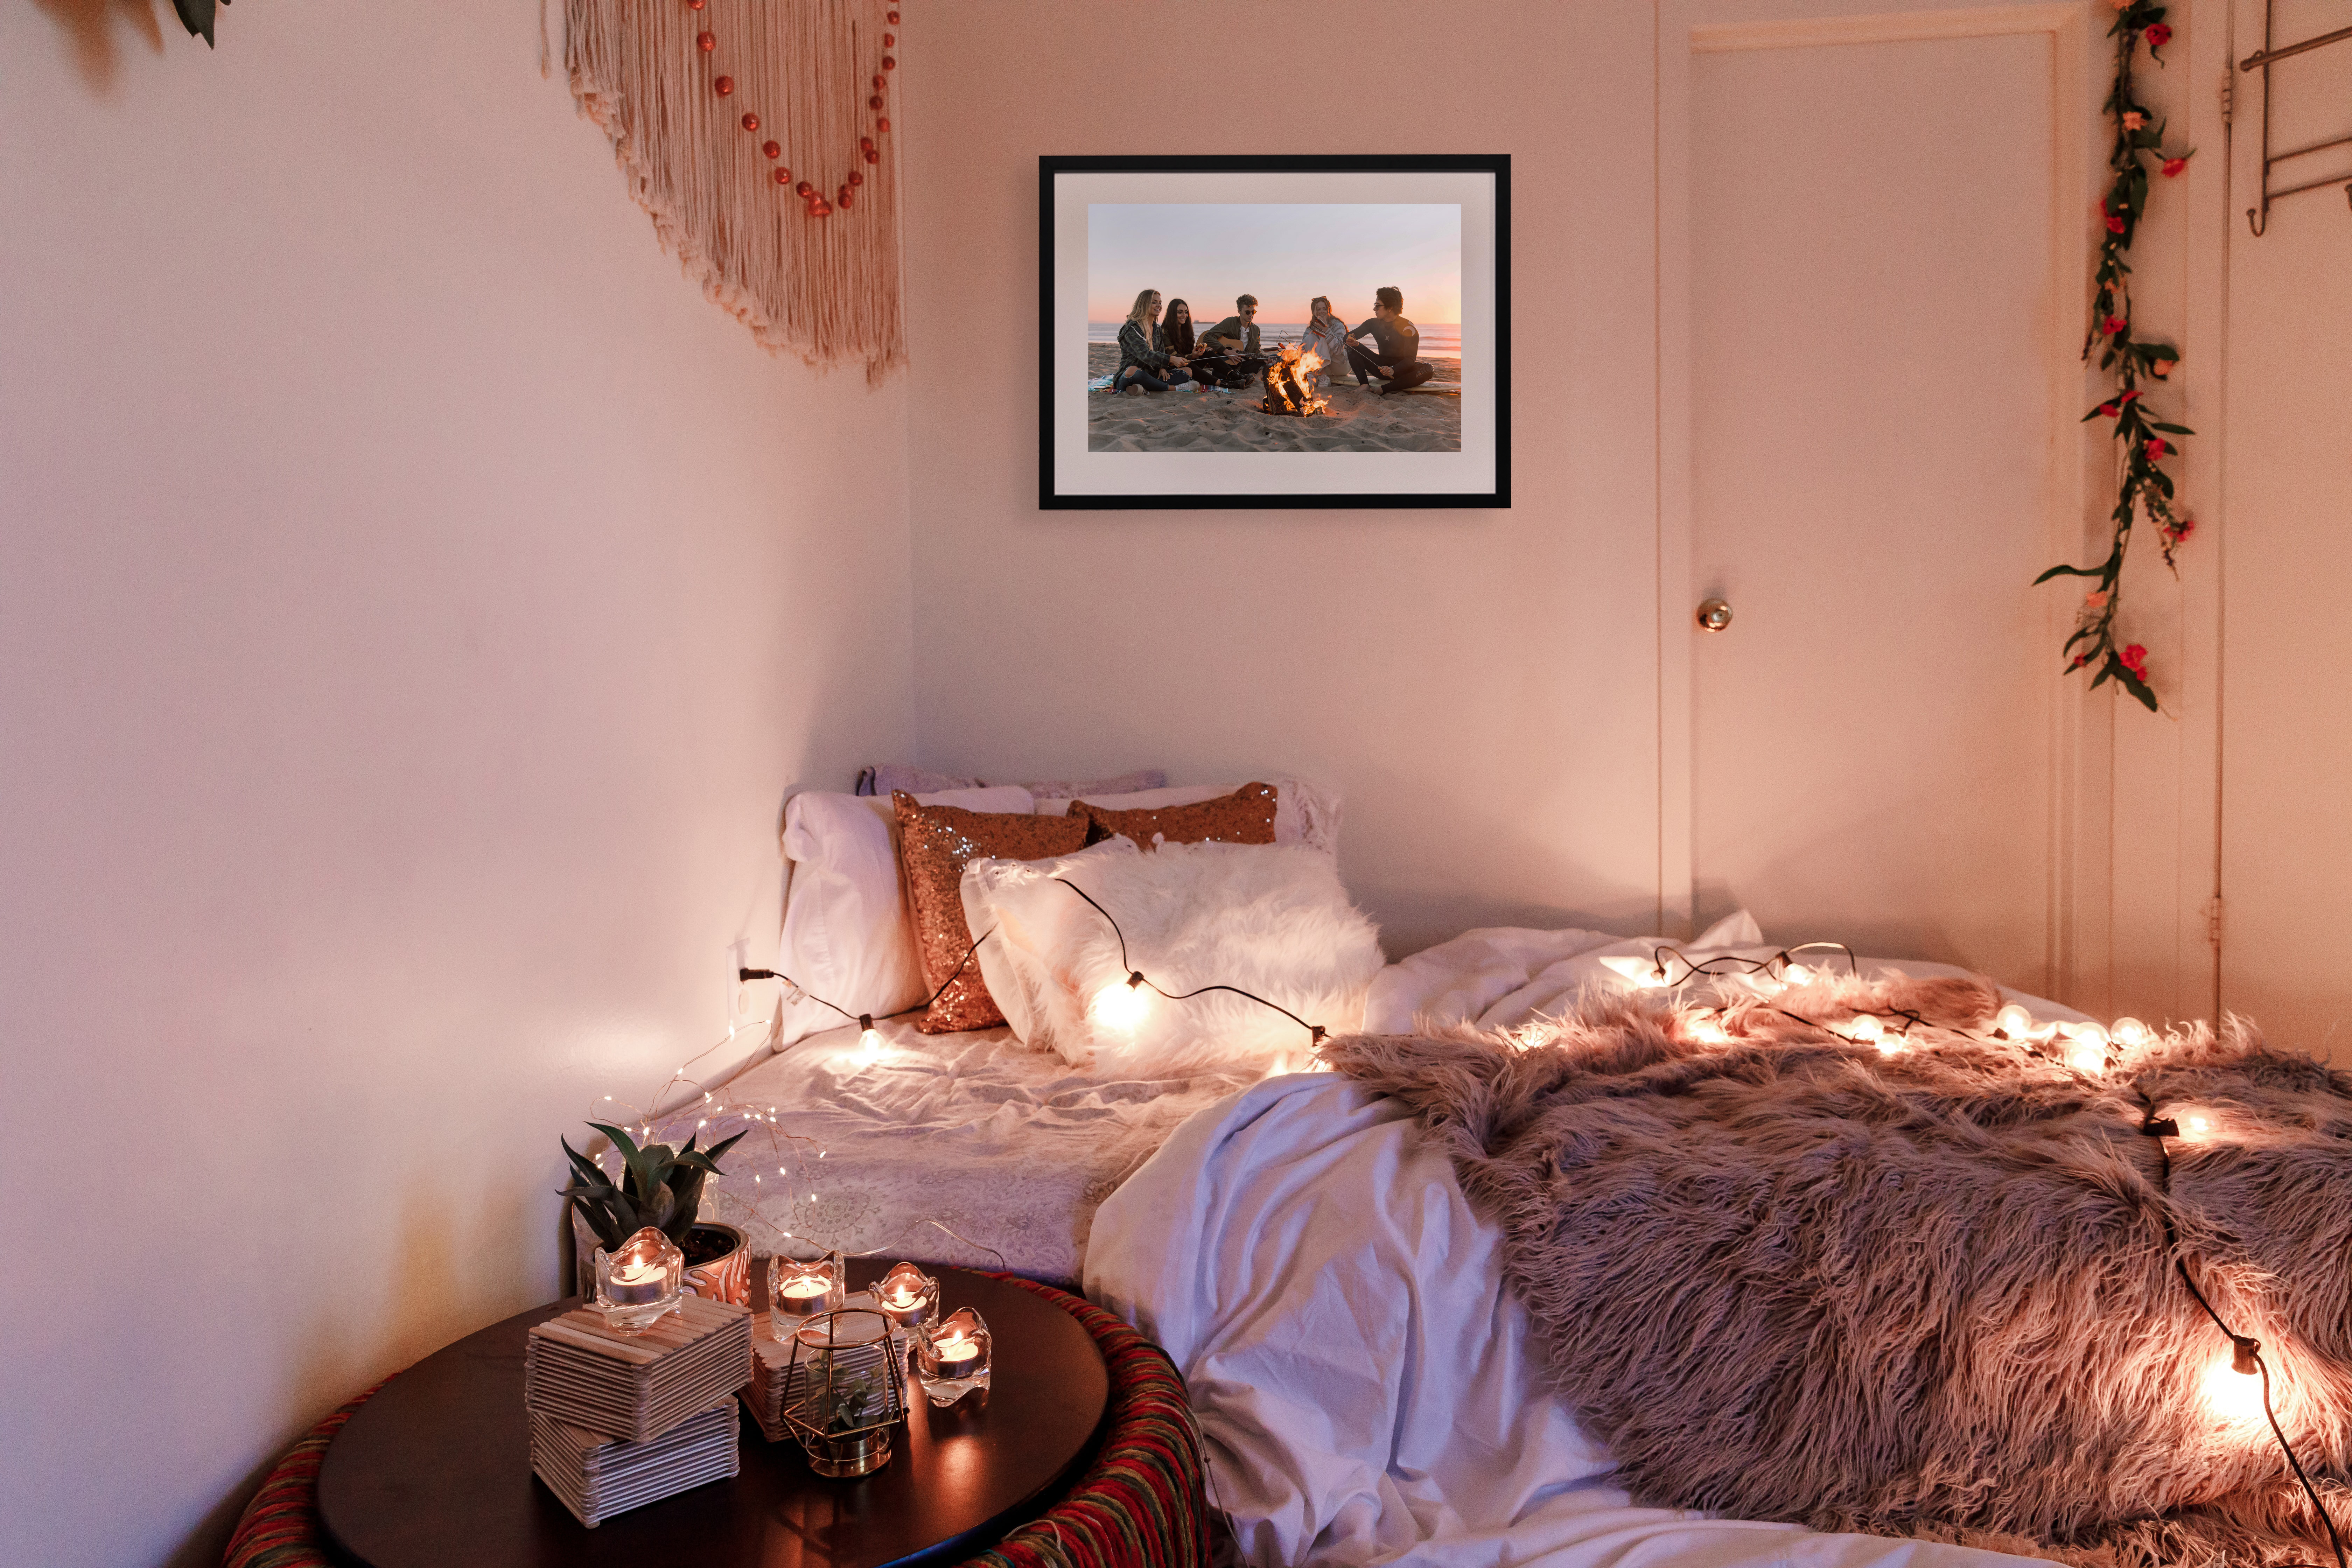 Framed print of friends at the beach in dorm room with fairy lights